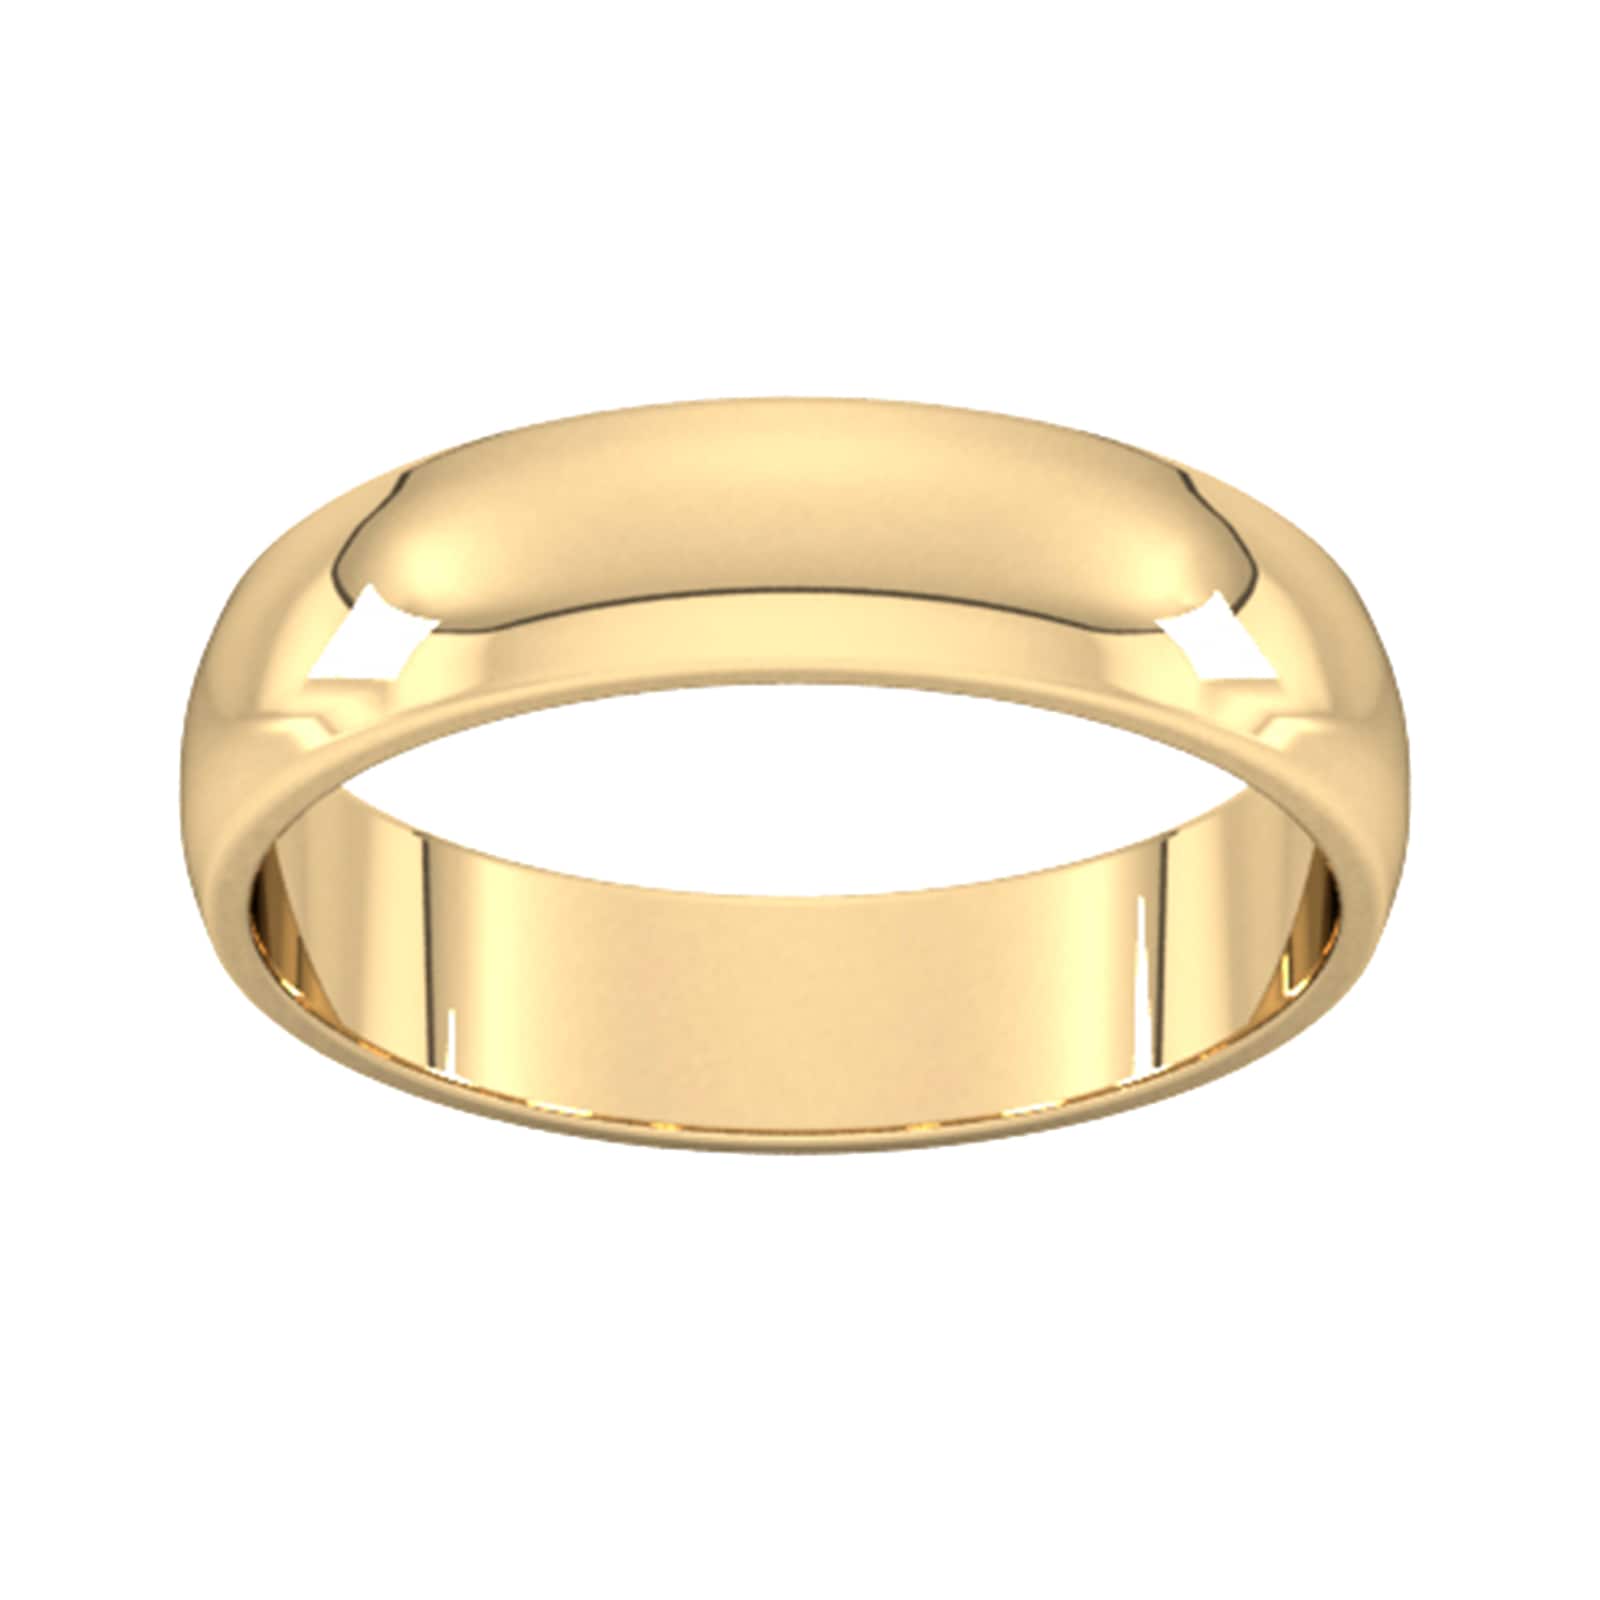 5mm D Shape Standard Wedding Ring In 18 Carat Yellow Gold - Ring Size L